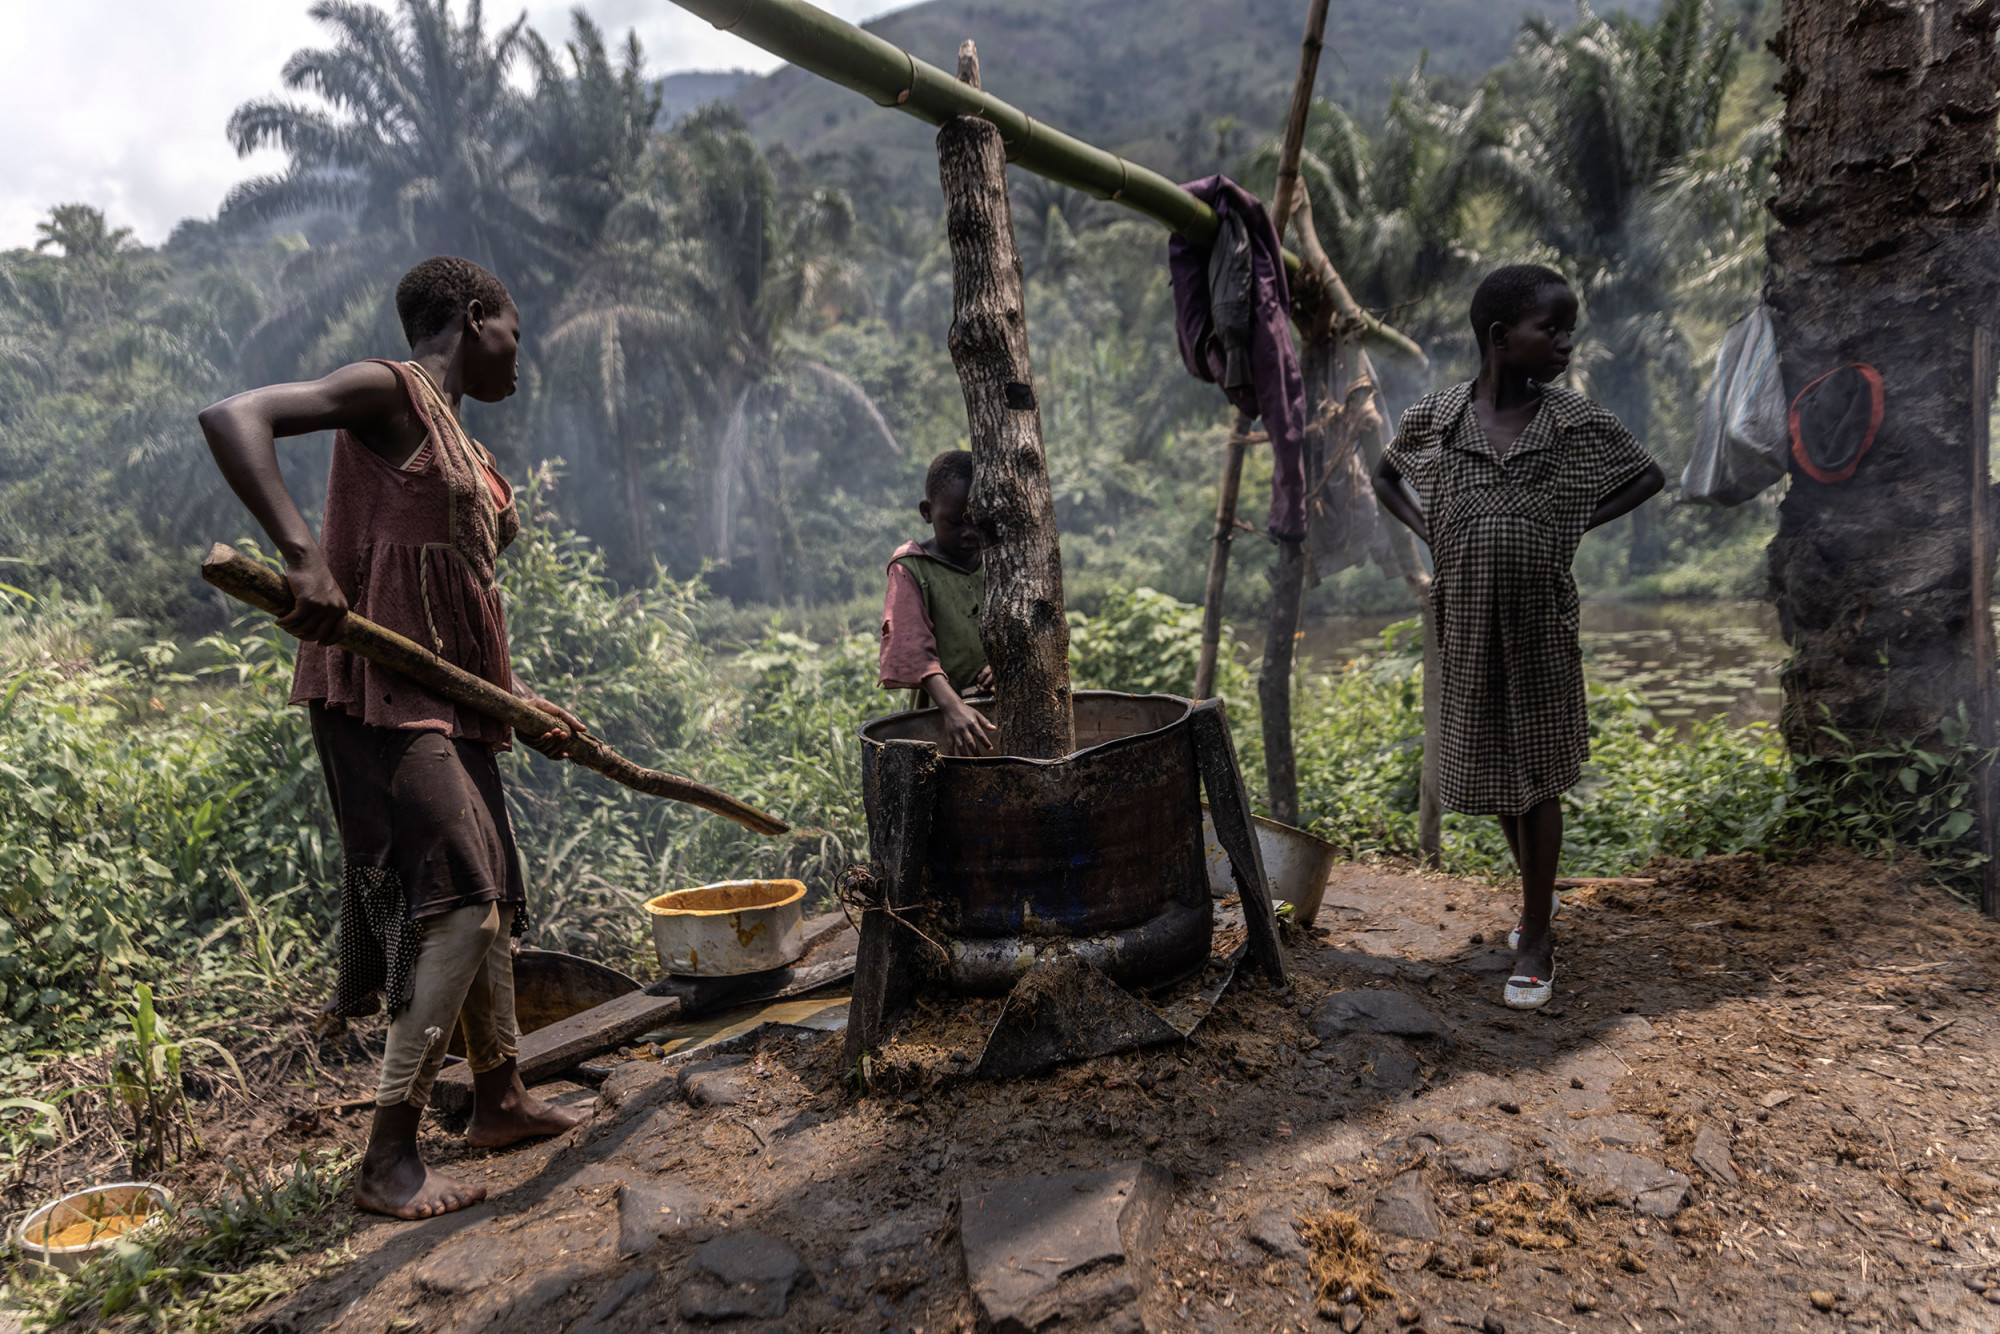 Bunyakiri, South-Kivu Province, September 02, 2021. Children in the artisanal palm oil factory working on the waste from the palm oil machine. © Guerchom Ndebo for Fondation Carmignac